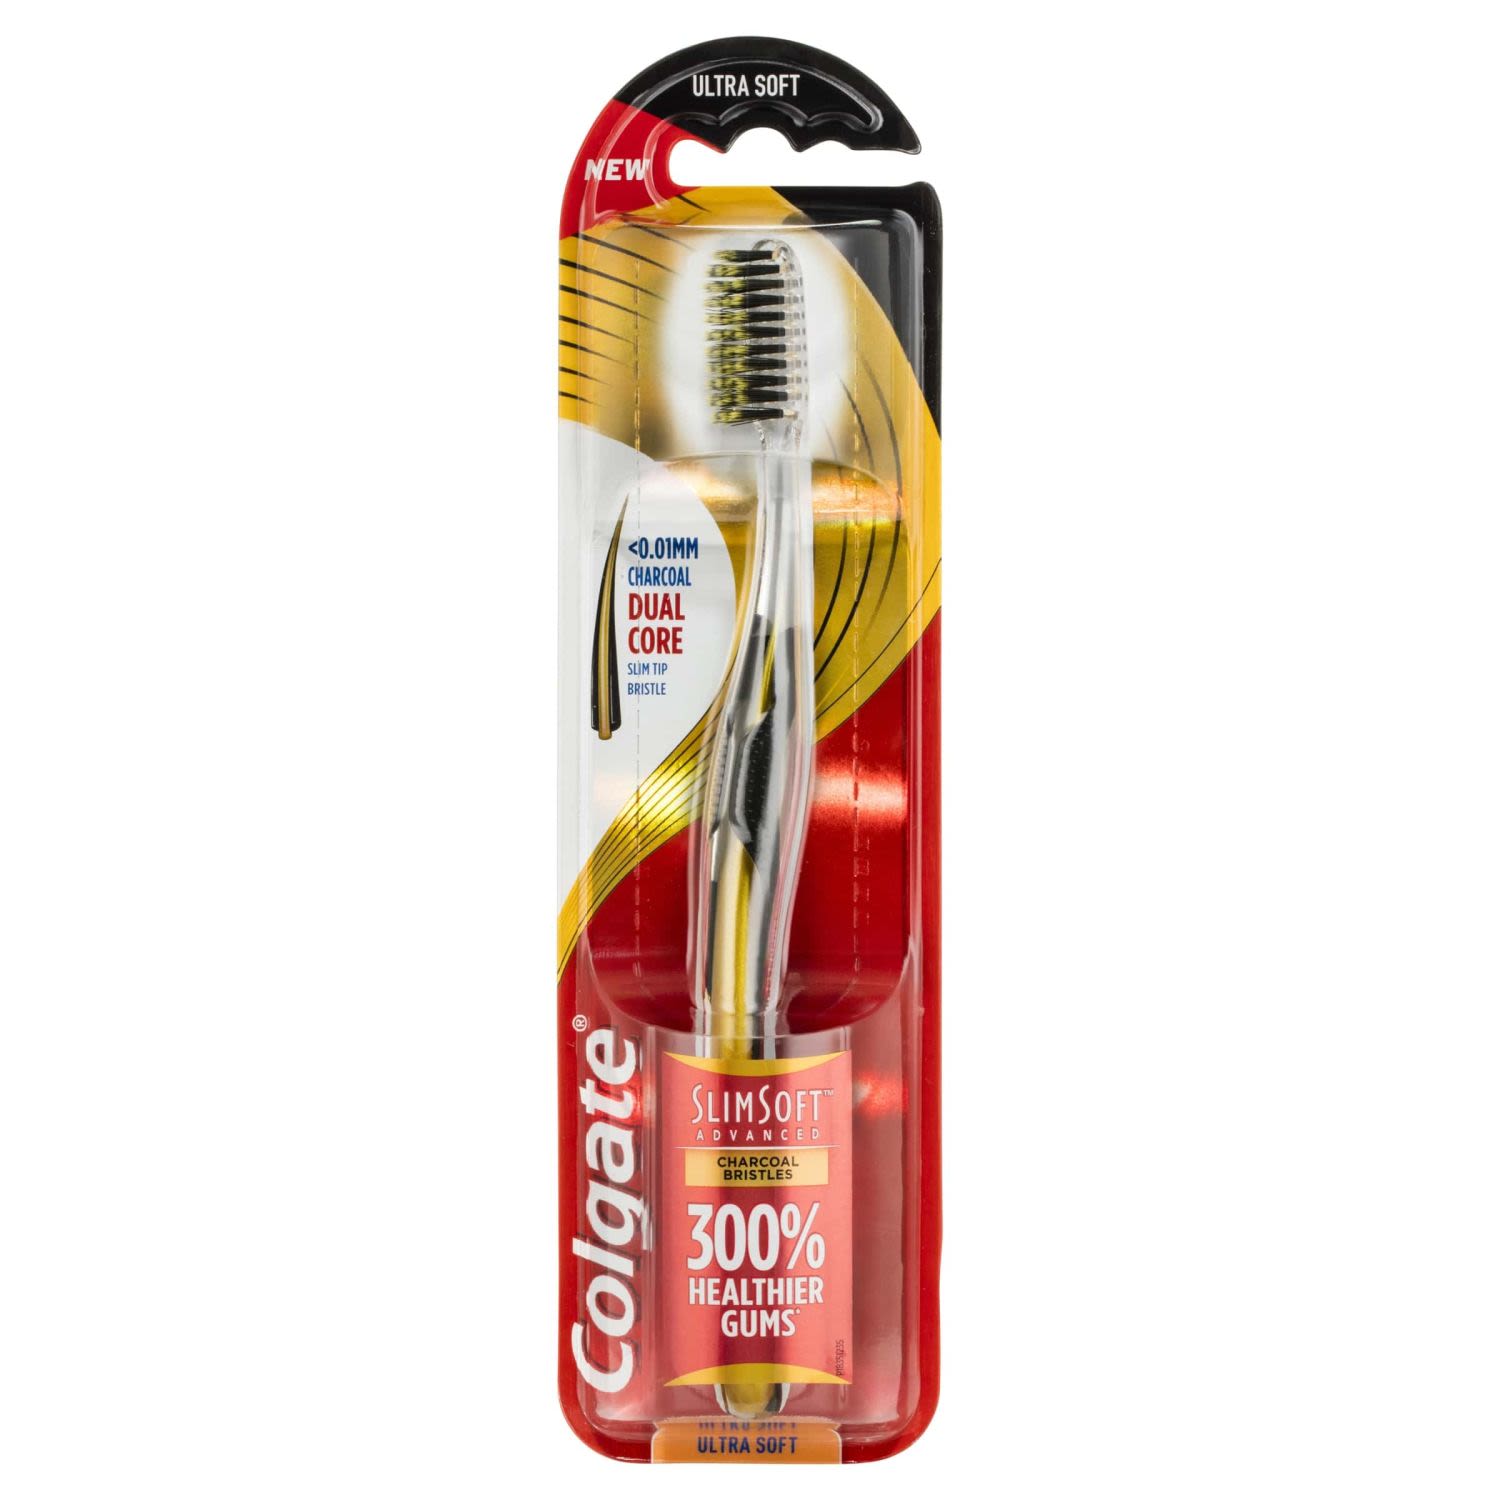 Colgate Slim Soft Advanced Charcoal with Charcoal infused bristles Ultra Soft Toothbrush, 1 Each